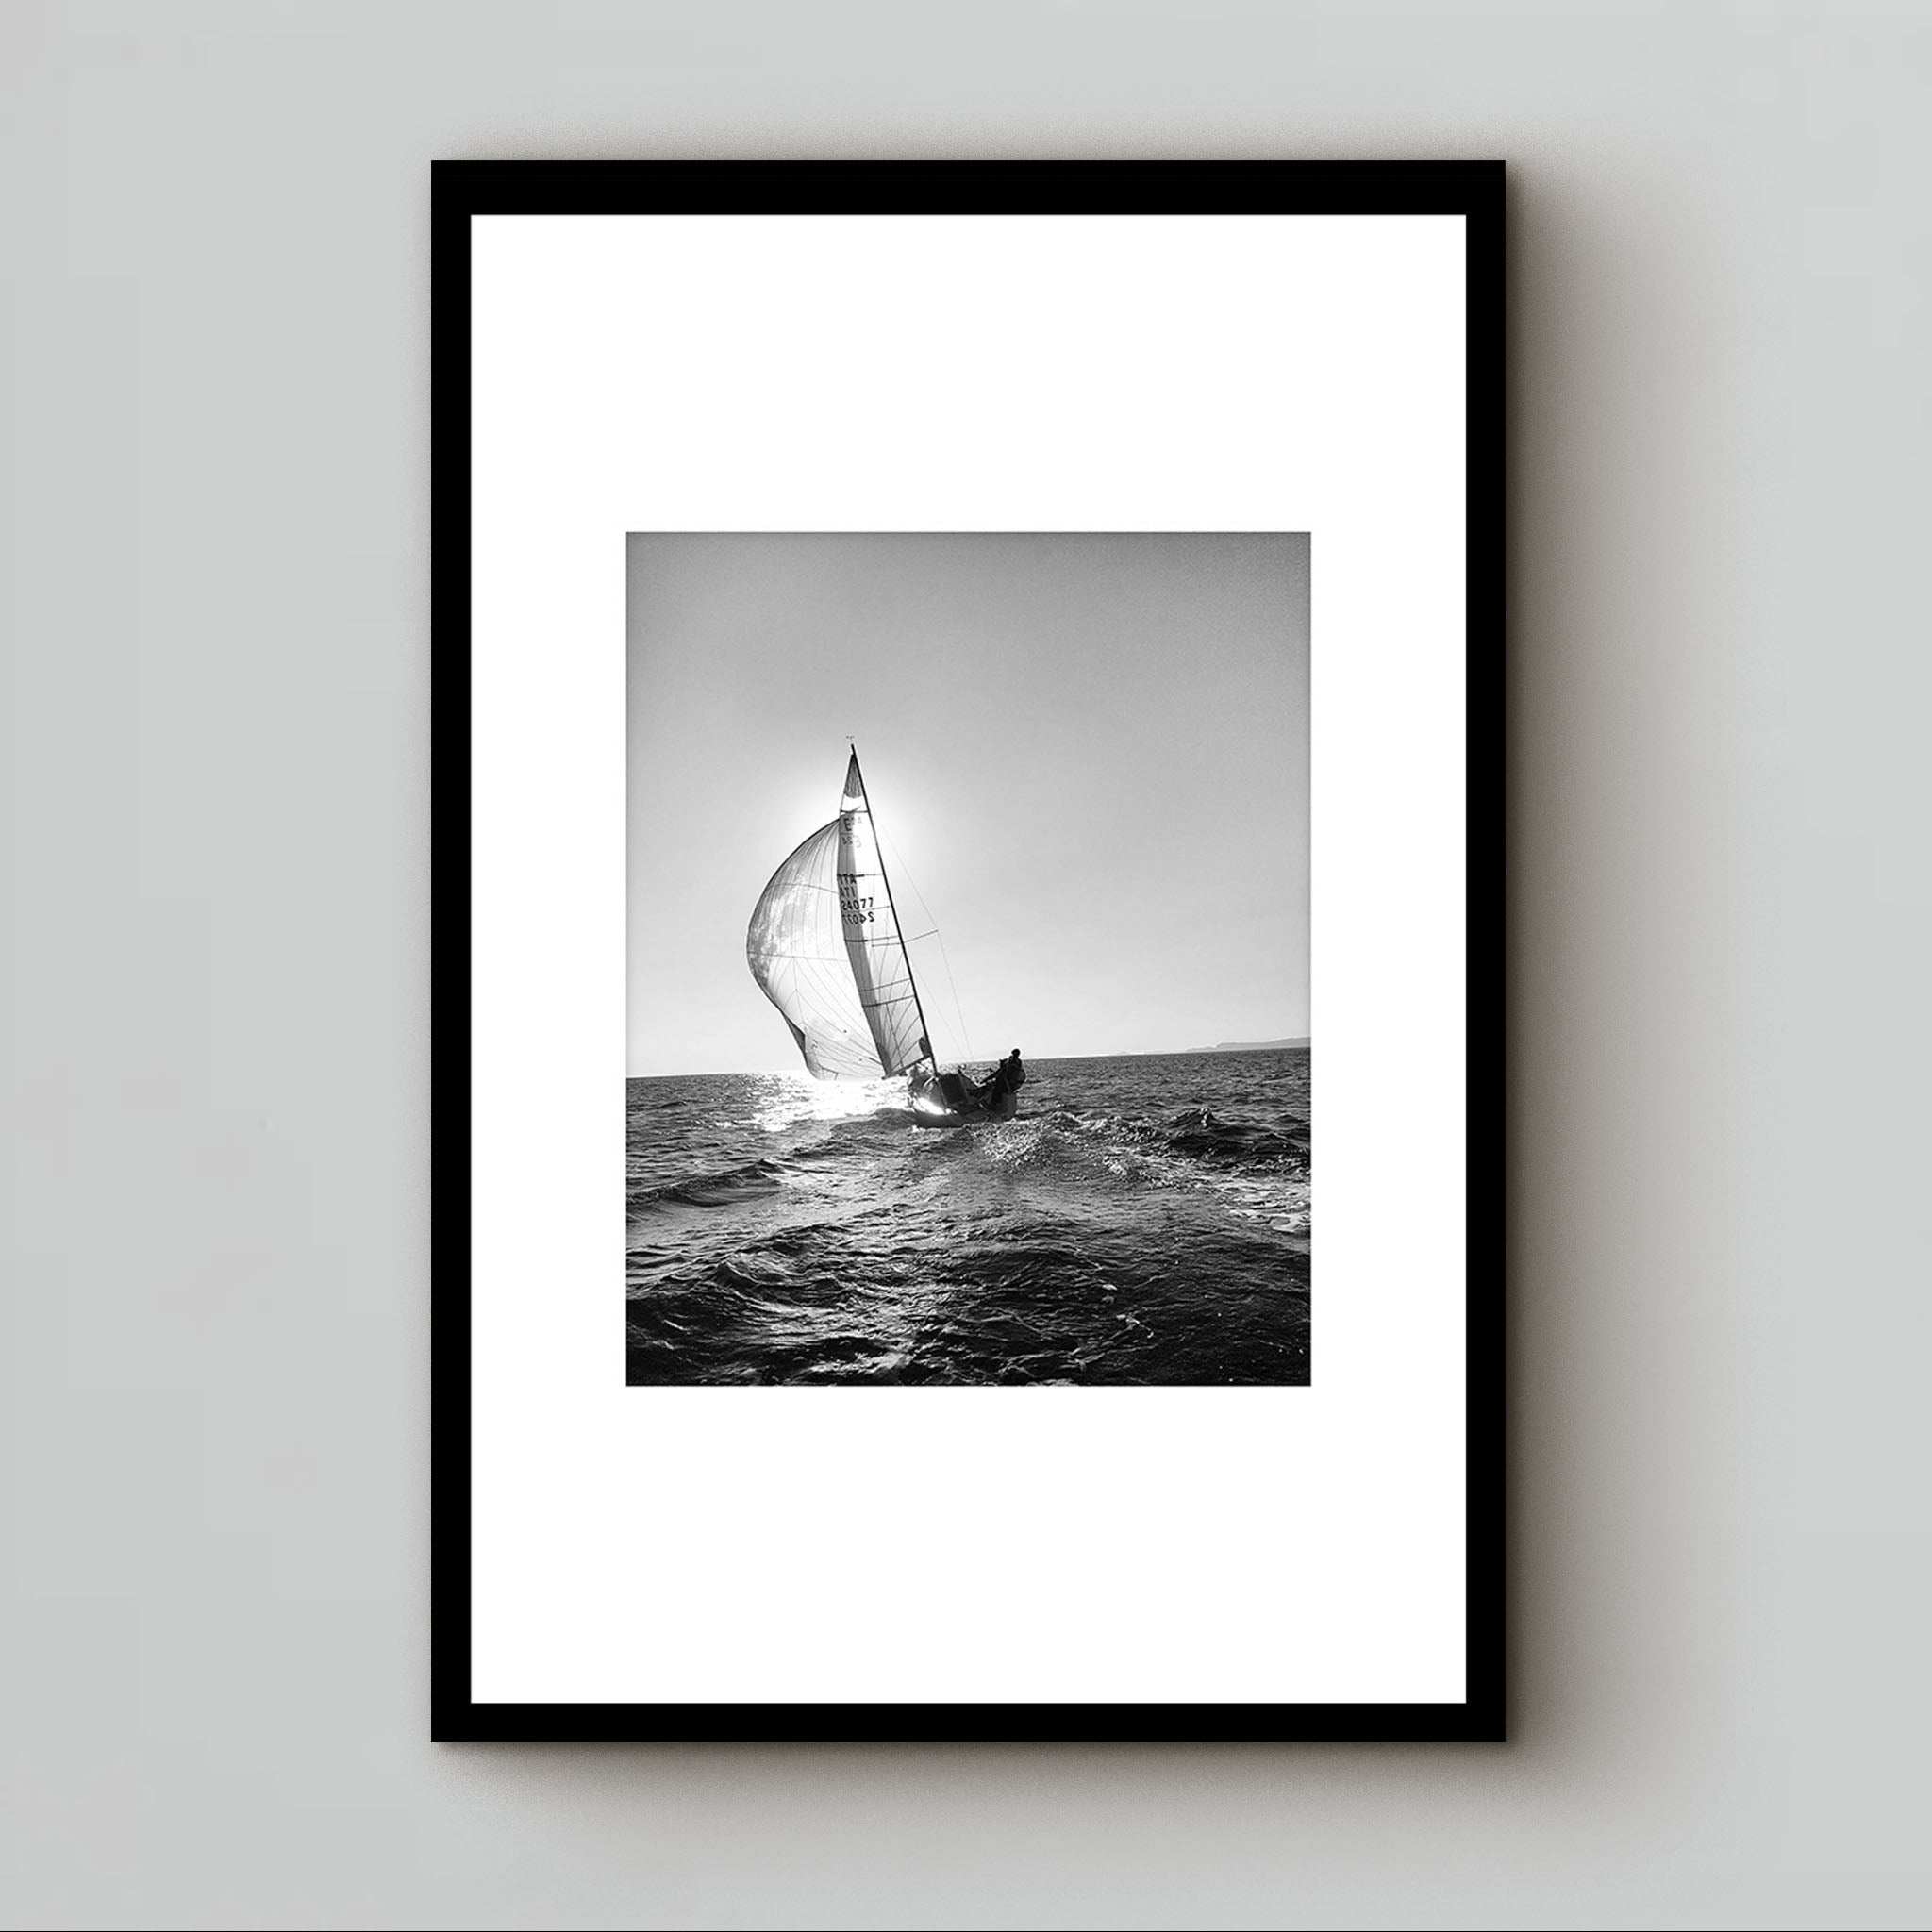 black and white photography under glass of a sunset sailboat